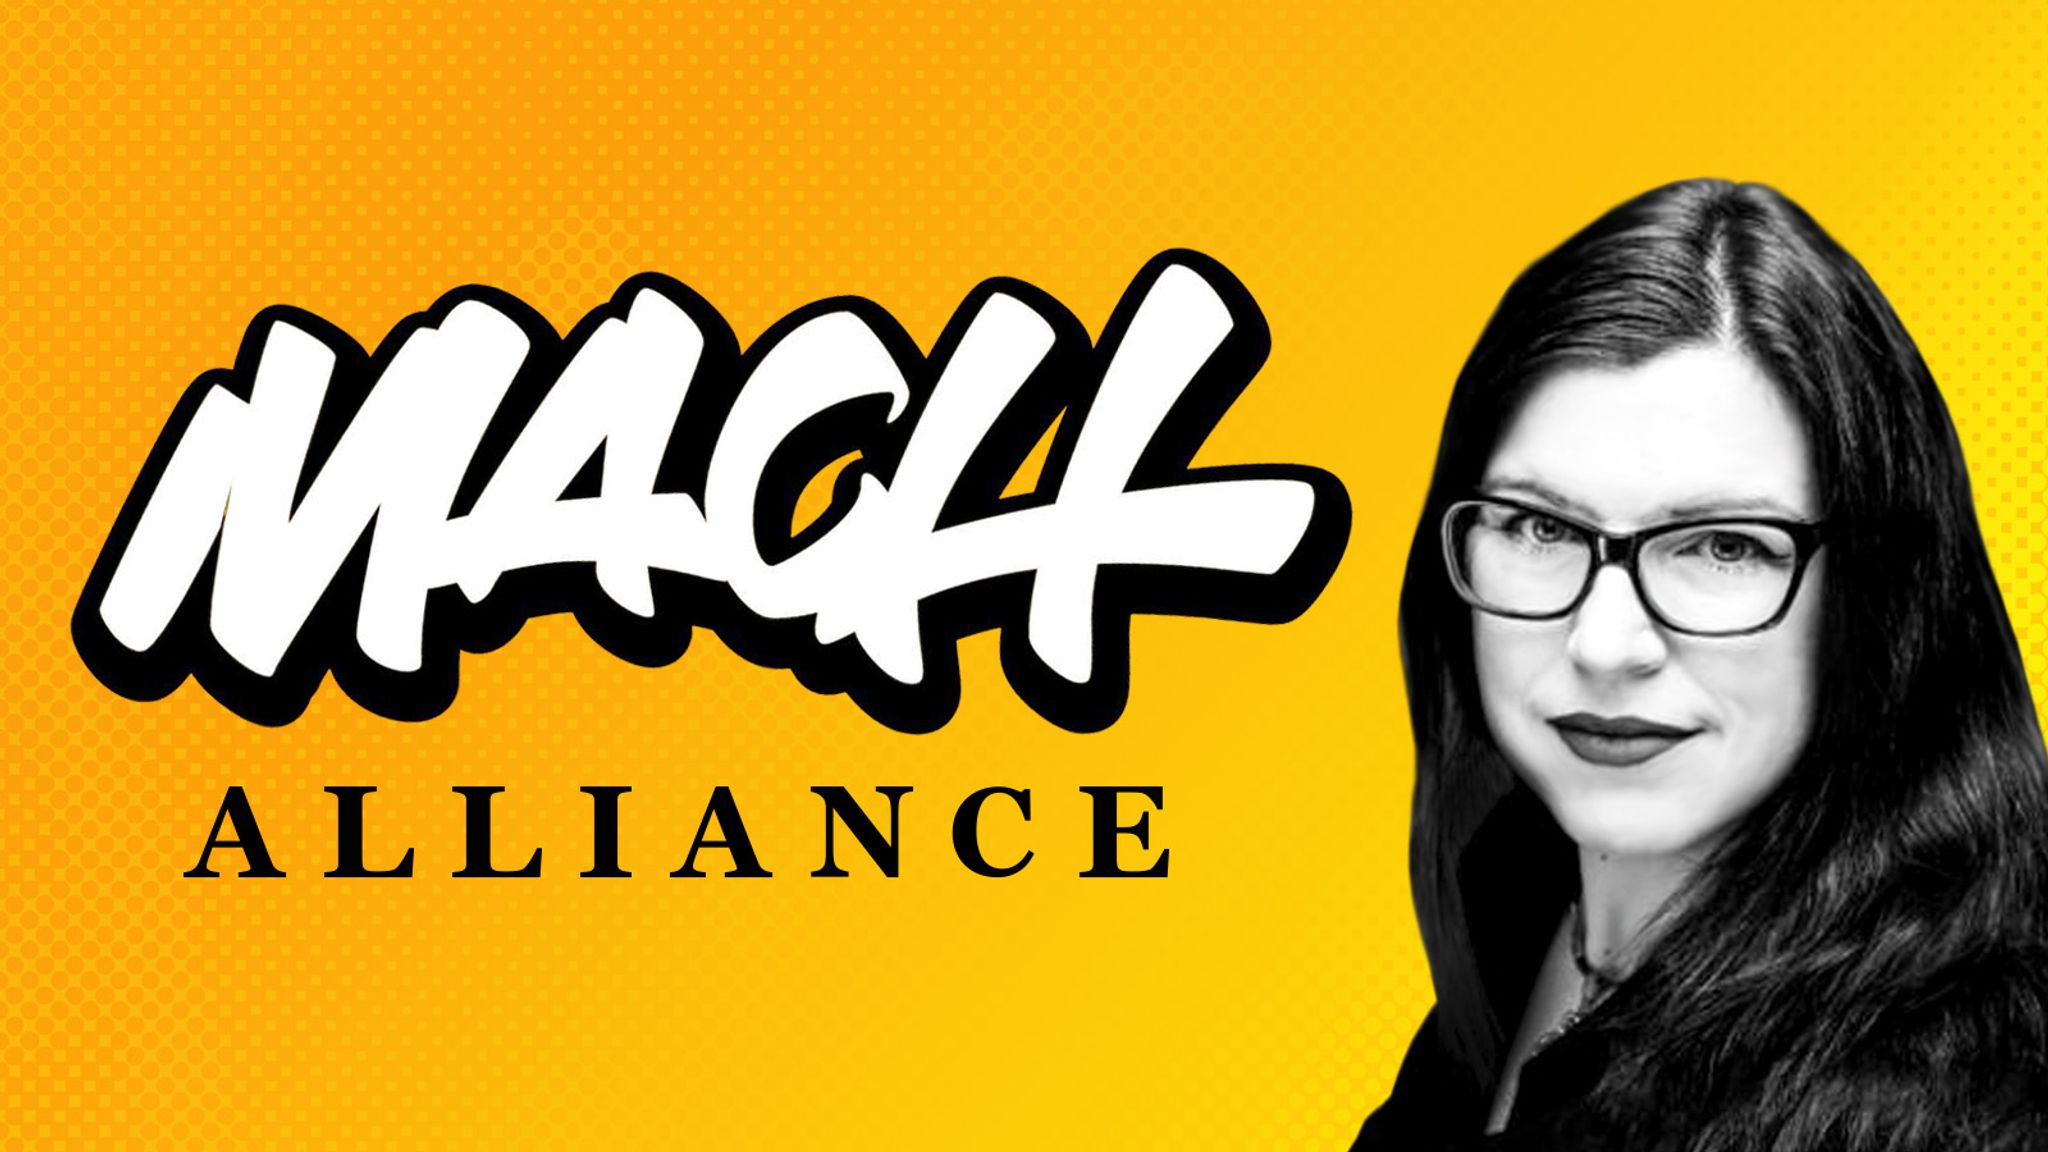 MACH Alliance featured image with Sonja Keerl headshot and MACH Alliance logo